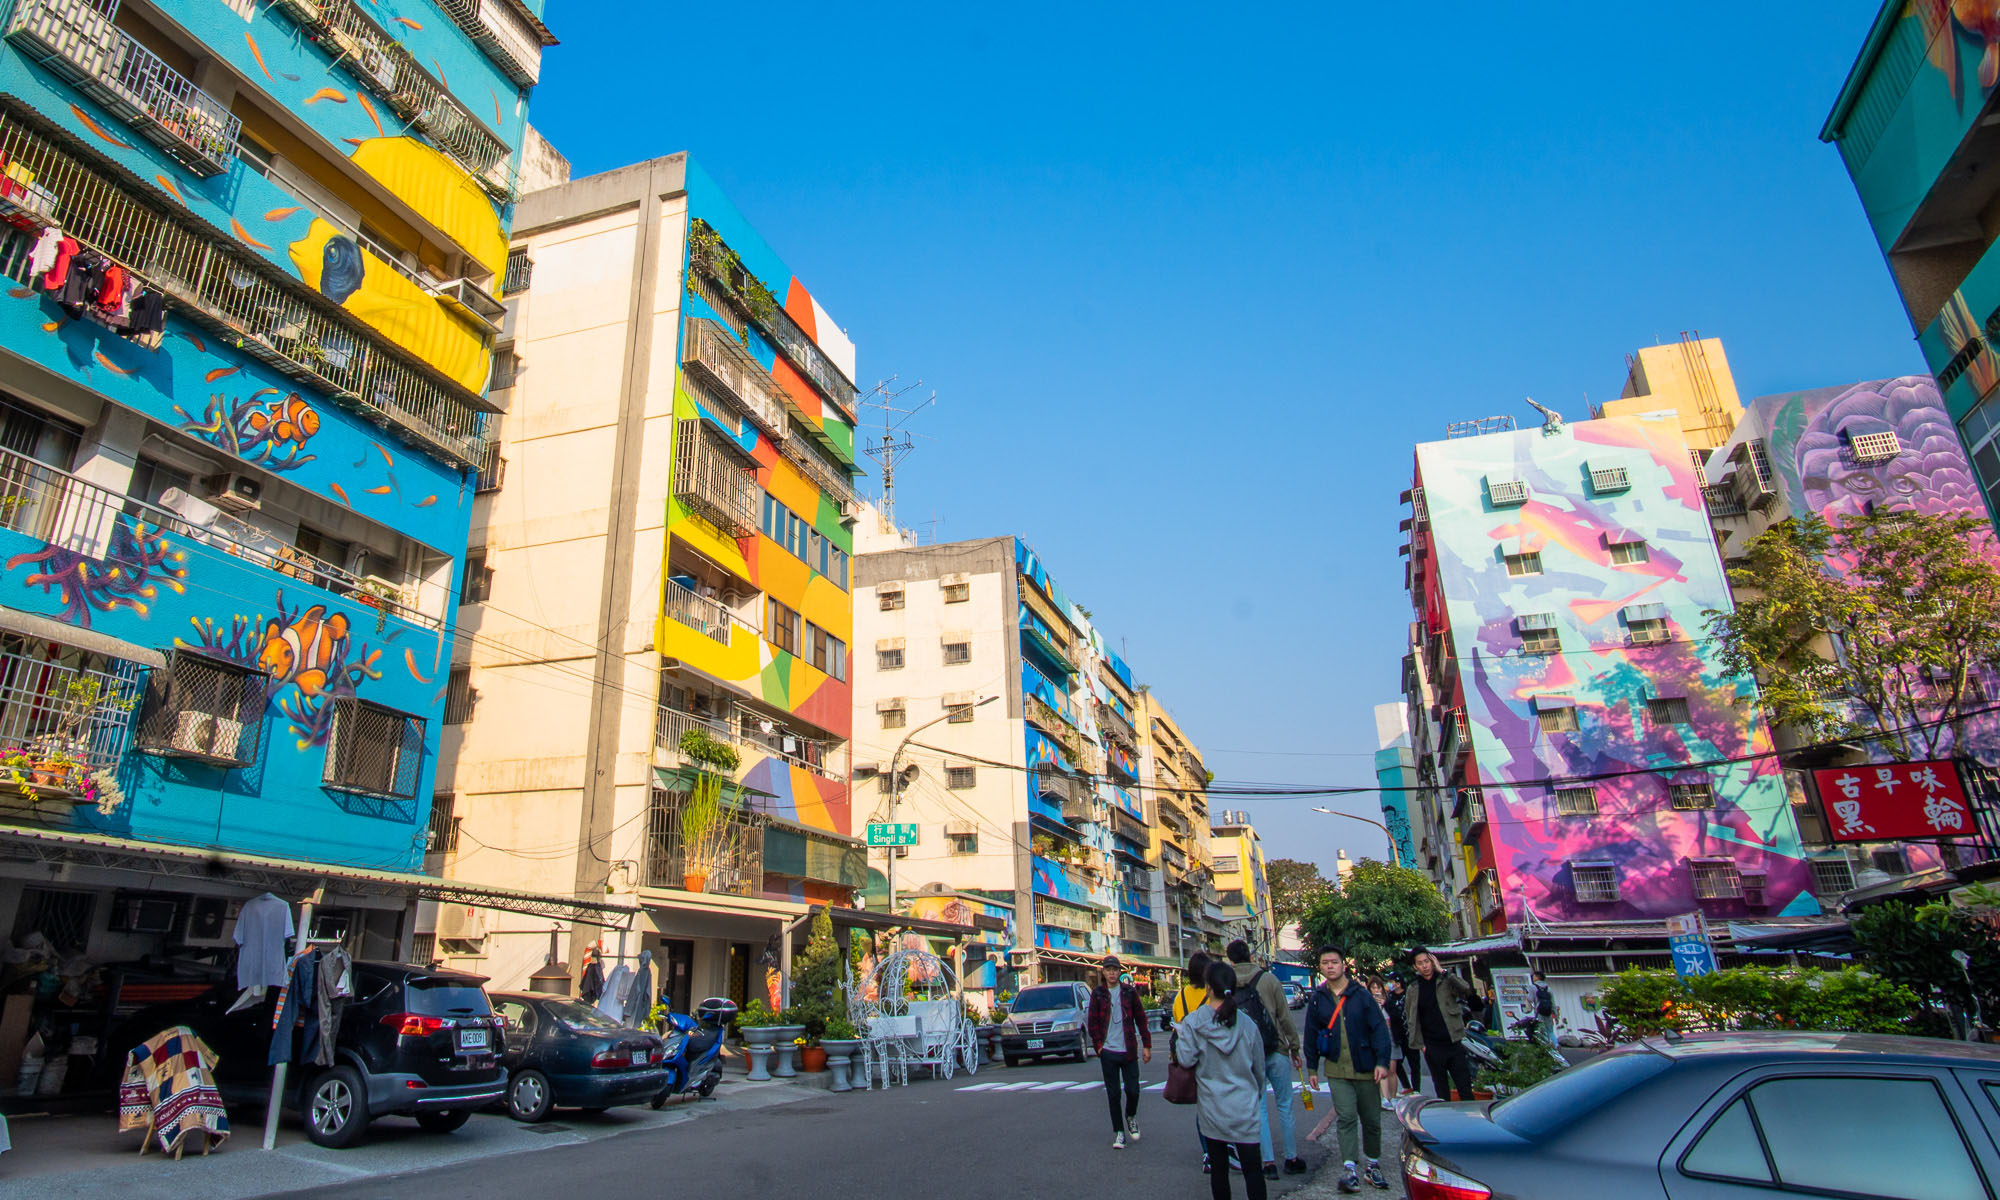 Colorful murals cover the entirity of building walls in Weiwu Mimi Street Art Village.